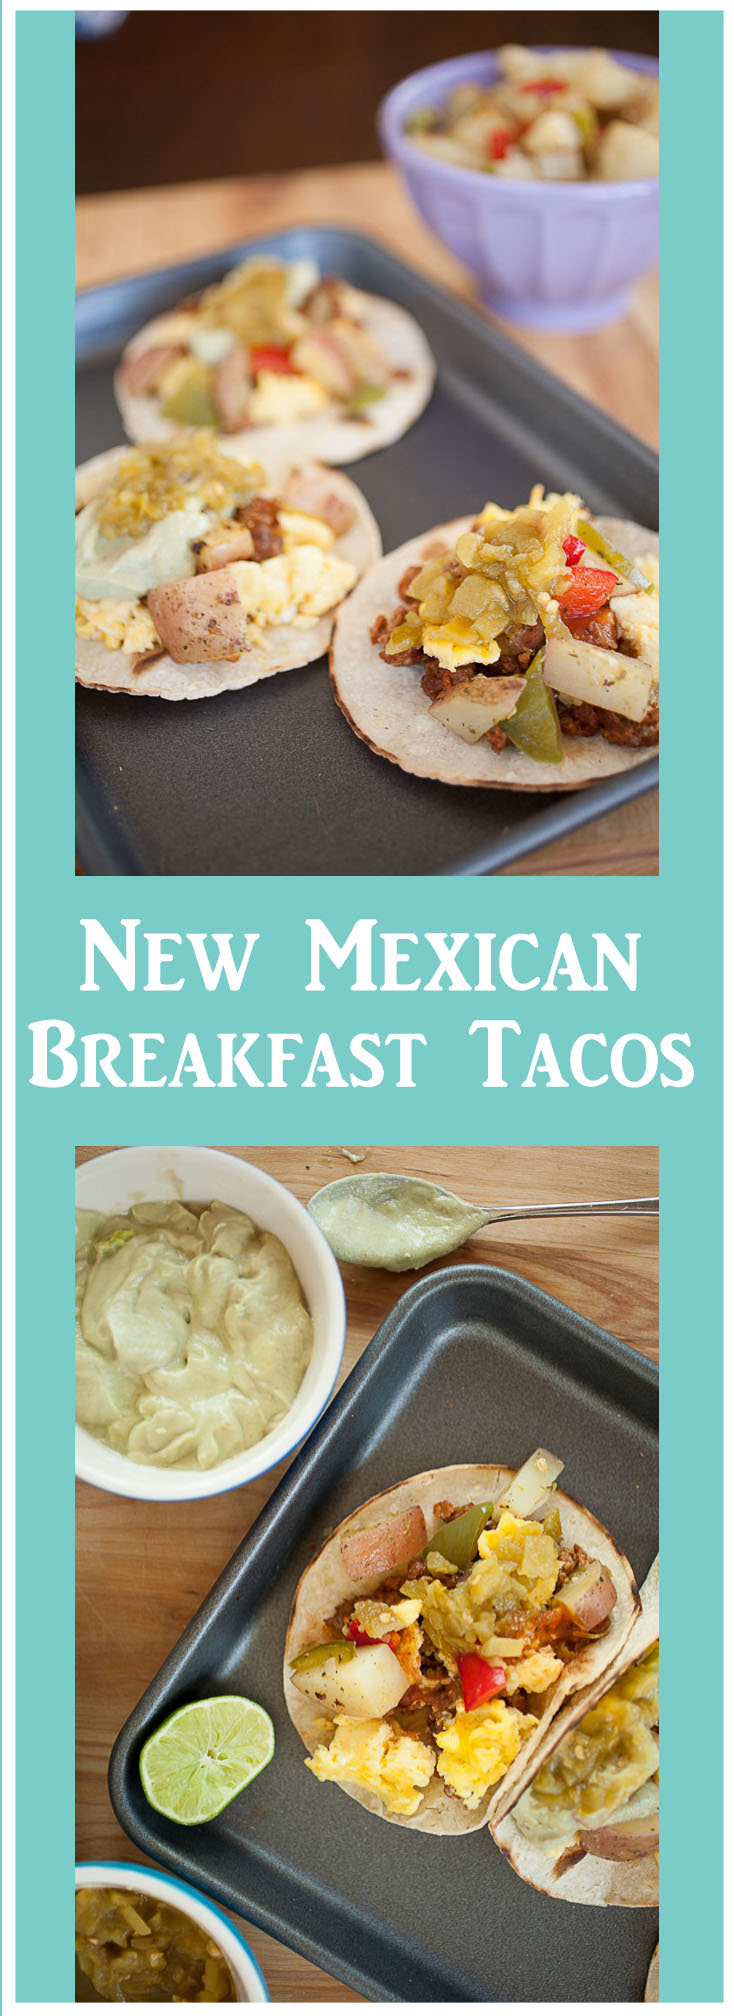 These New Mexican Breakfast Tacos are completely delicious, completely satisfying, and come with a little New Mexican kick thanks to Hatch green chile!